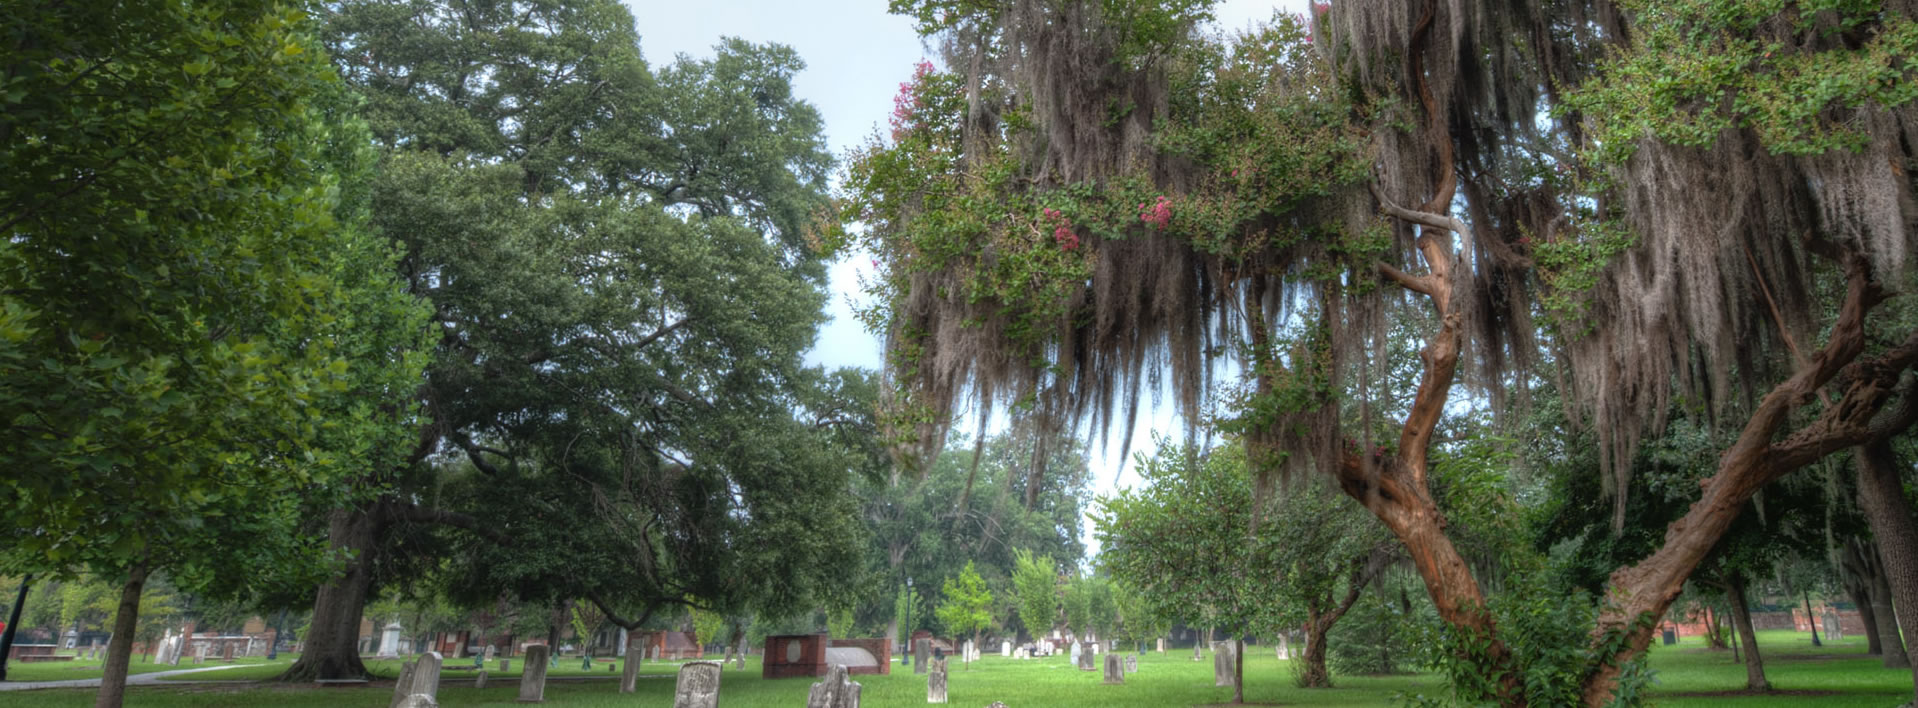 A section of Colonial Park Cemetery